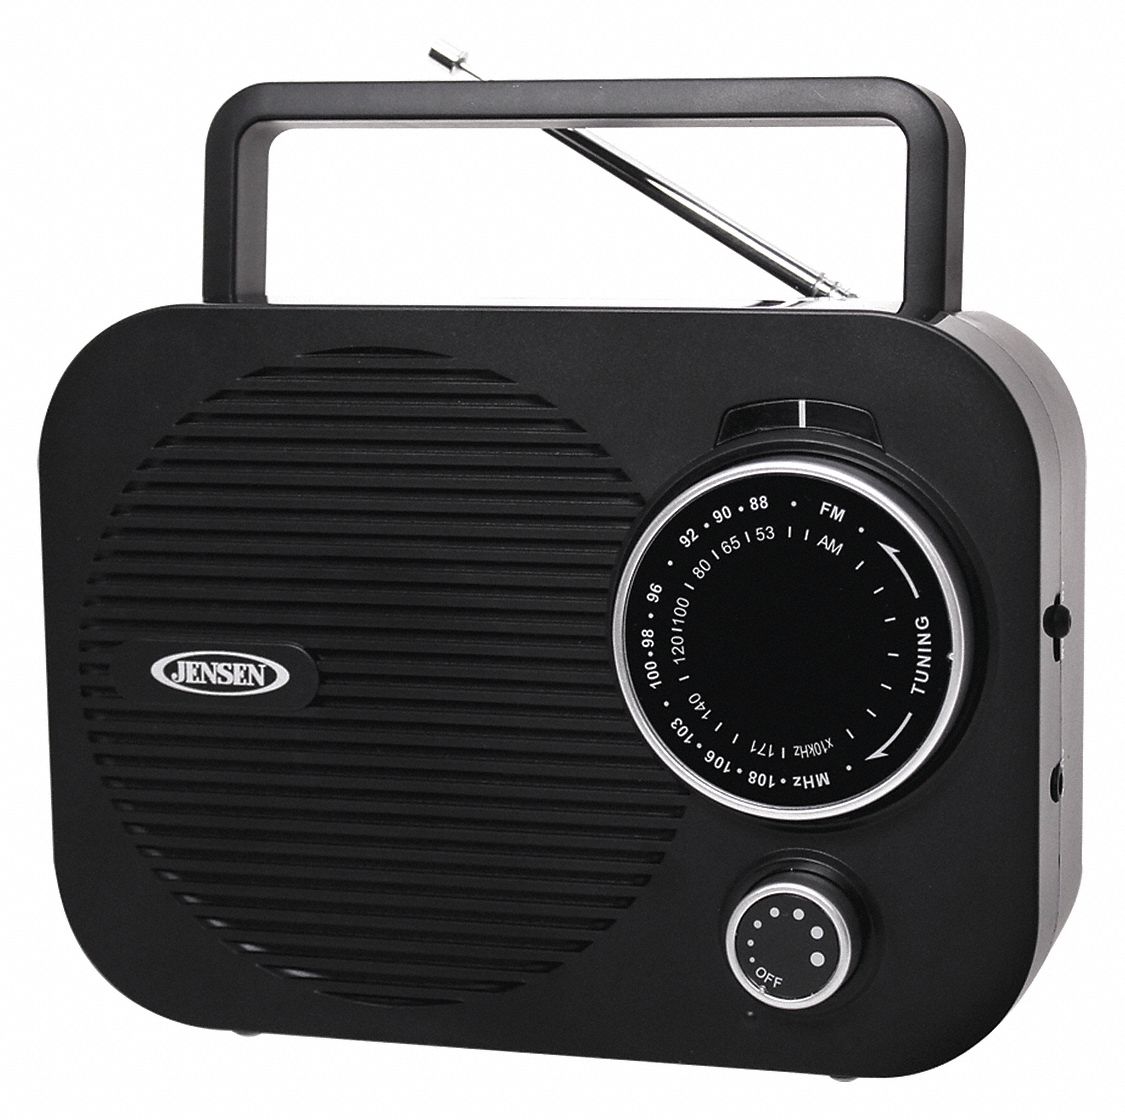 Radio: AC, 0 Alarms, Black, Black, 6 in Radio Overall Wd, 6 in Radio Overall Dp, Battery Backup